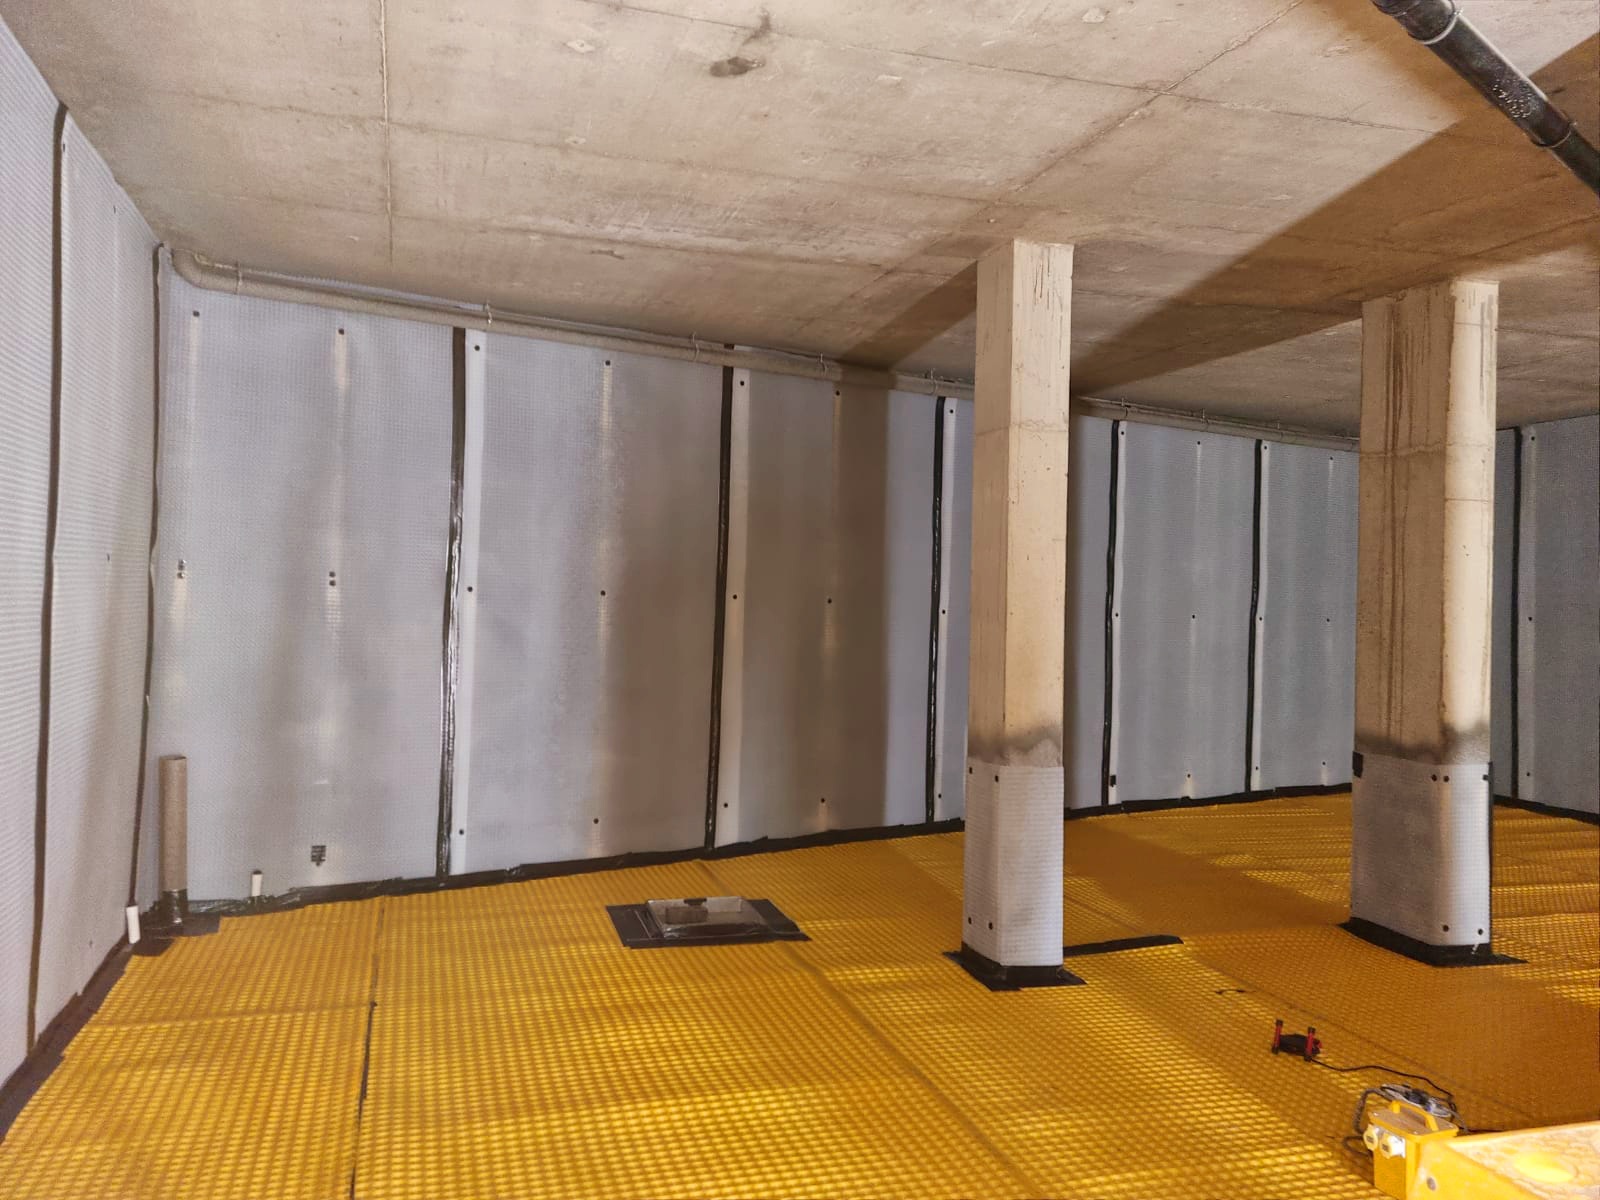 Wykamol have helped to build large, new basements in Northwest London.